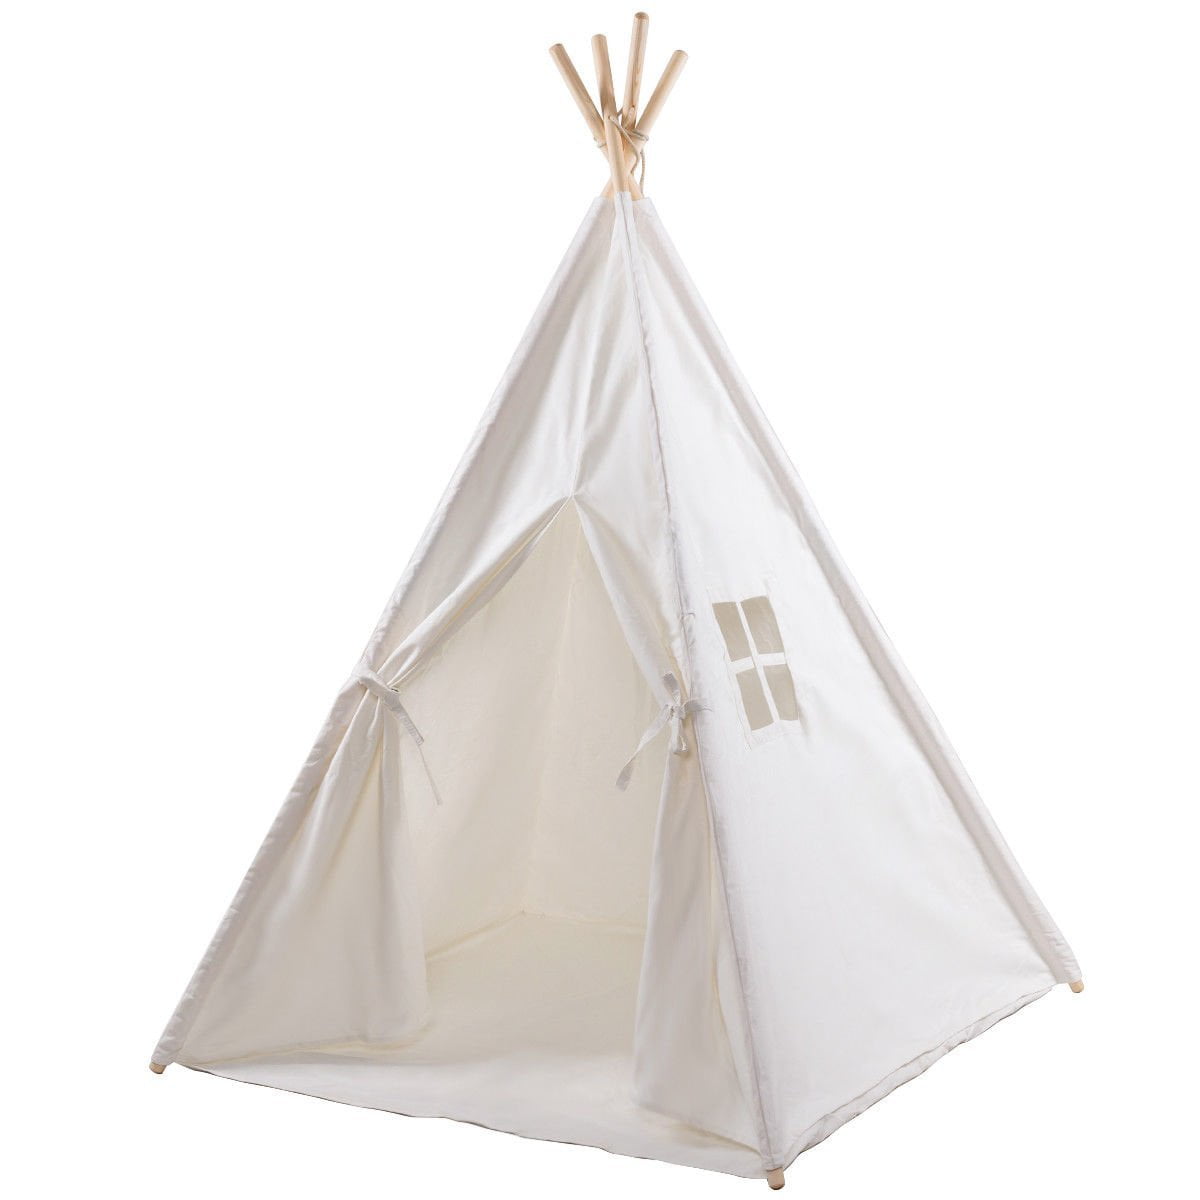 Details about   Kids Play Tent Indian Tent Cotton Children Playhut Large 51" Height Teepee Tent 